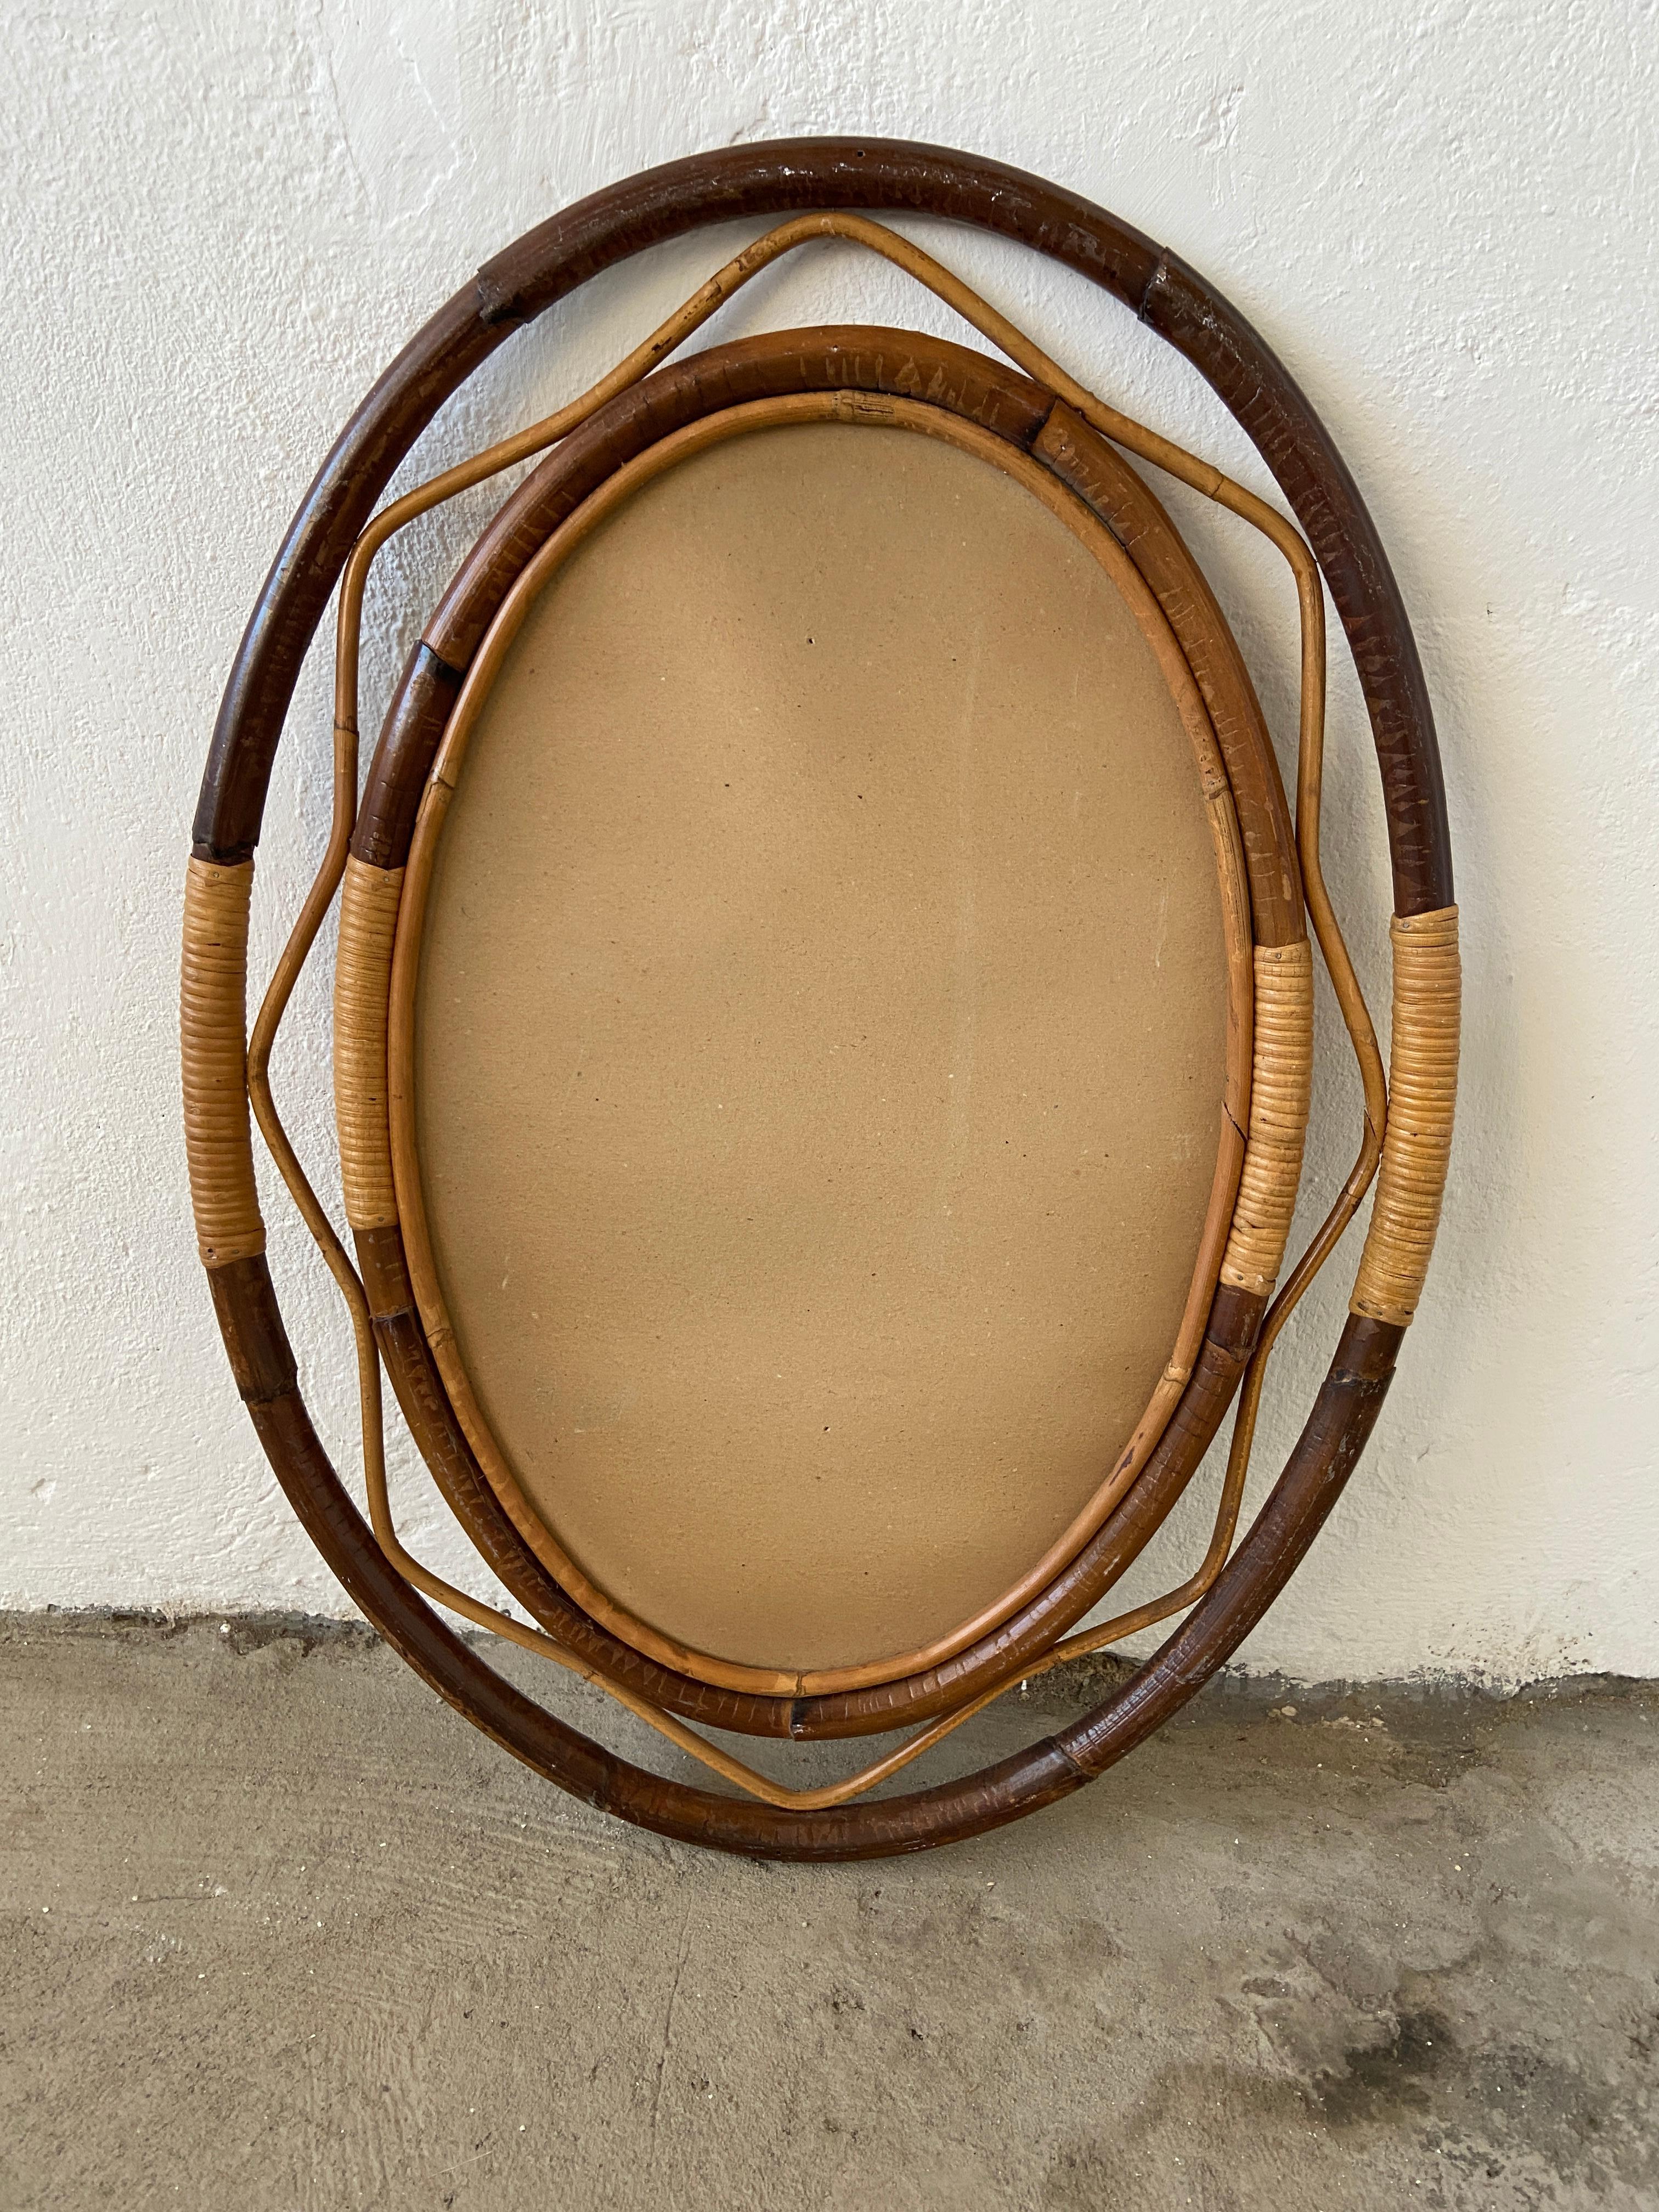 Mid-20th Century Mid-Century Modern Spanish Wicker and Cane Oval Wall Mirror, 1960s